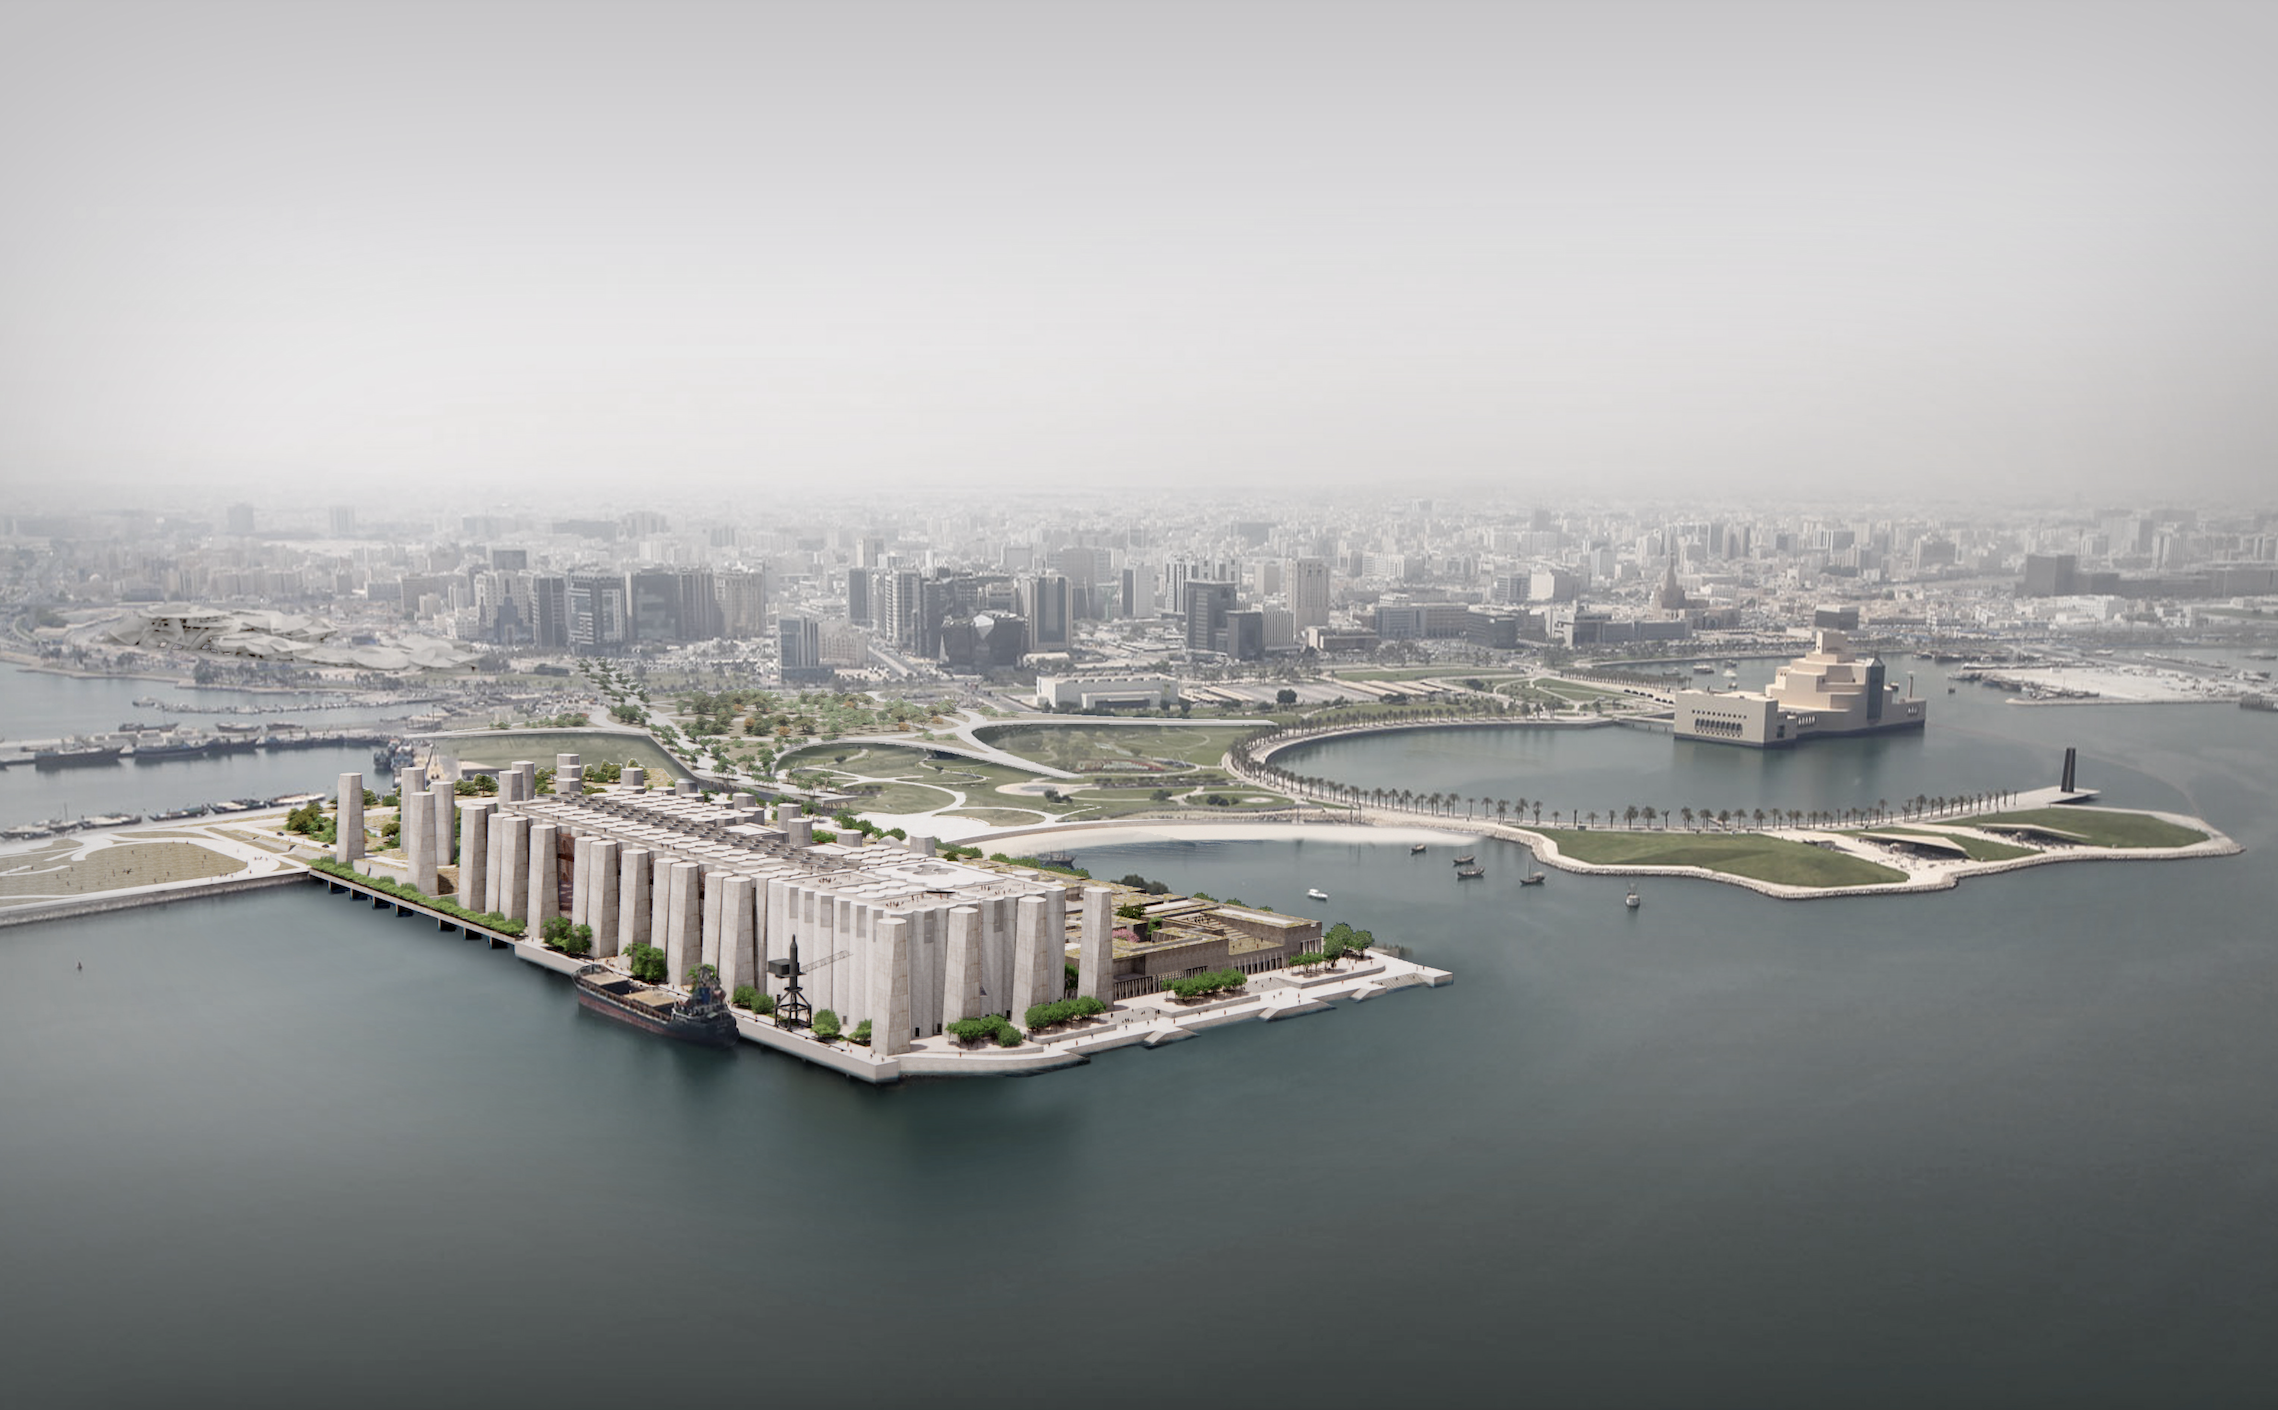 Coastline of Doha seen from above, showing the future location of Art Mill Museum by the waterfront.